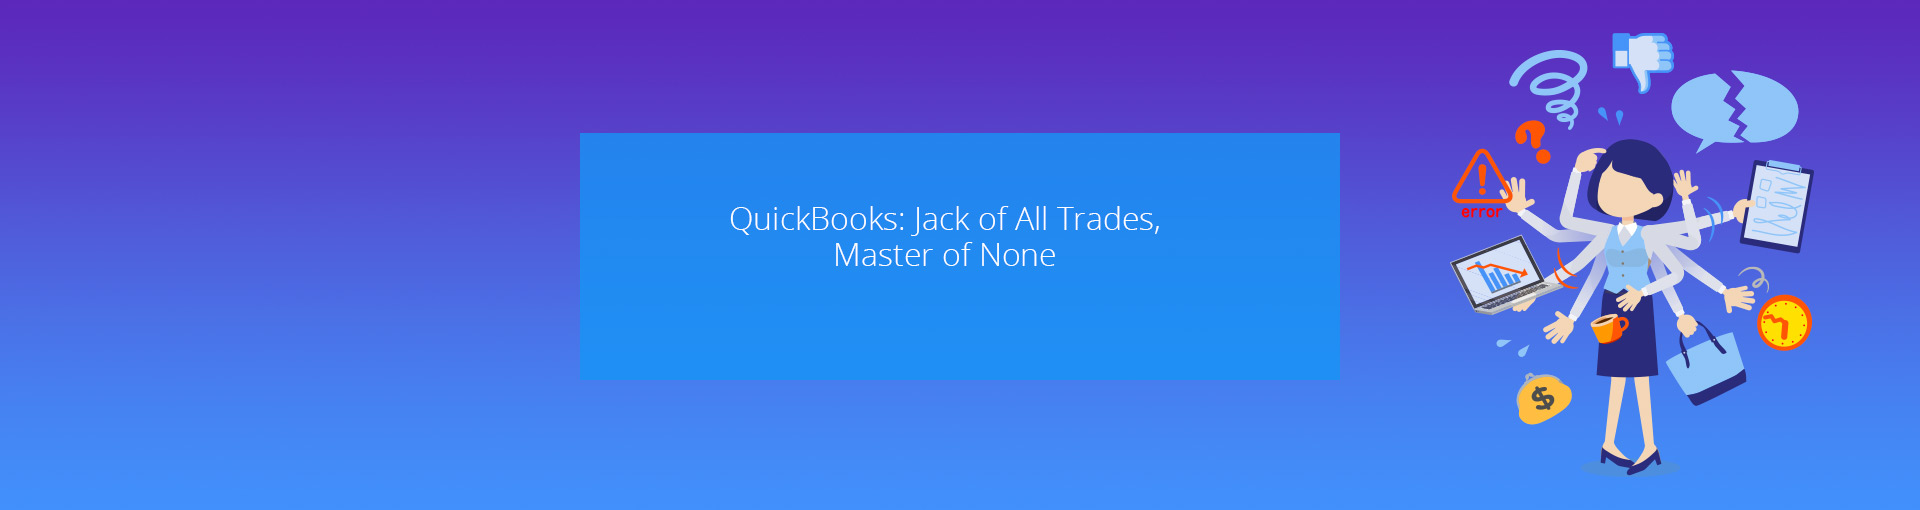 QuickBooks: Jack of All Trades, Master of None Featured Image